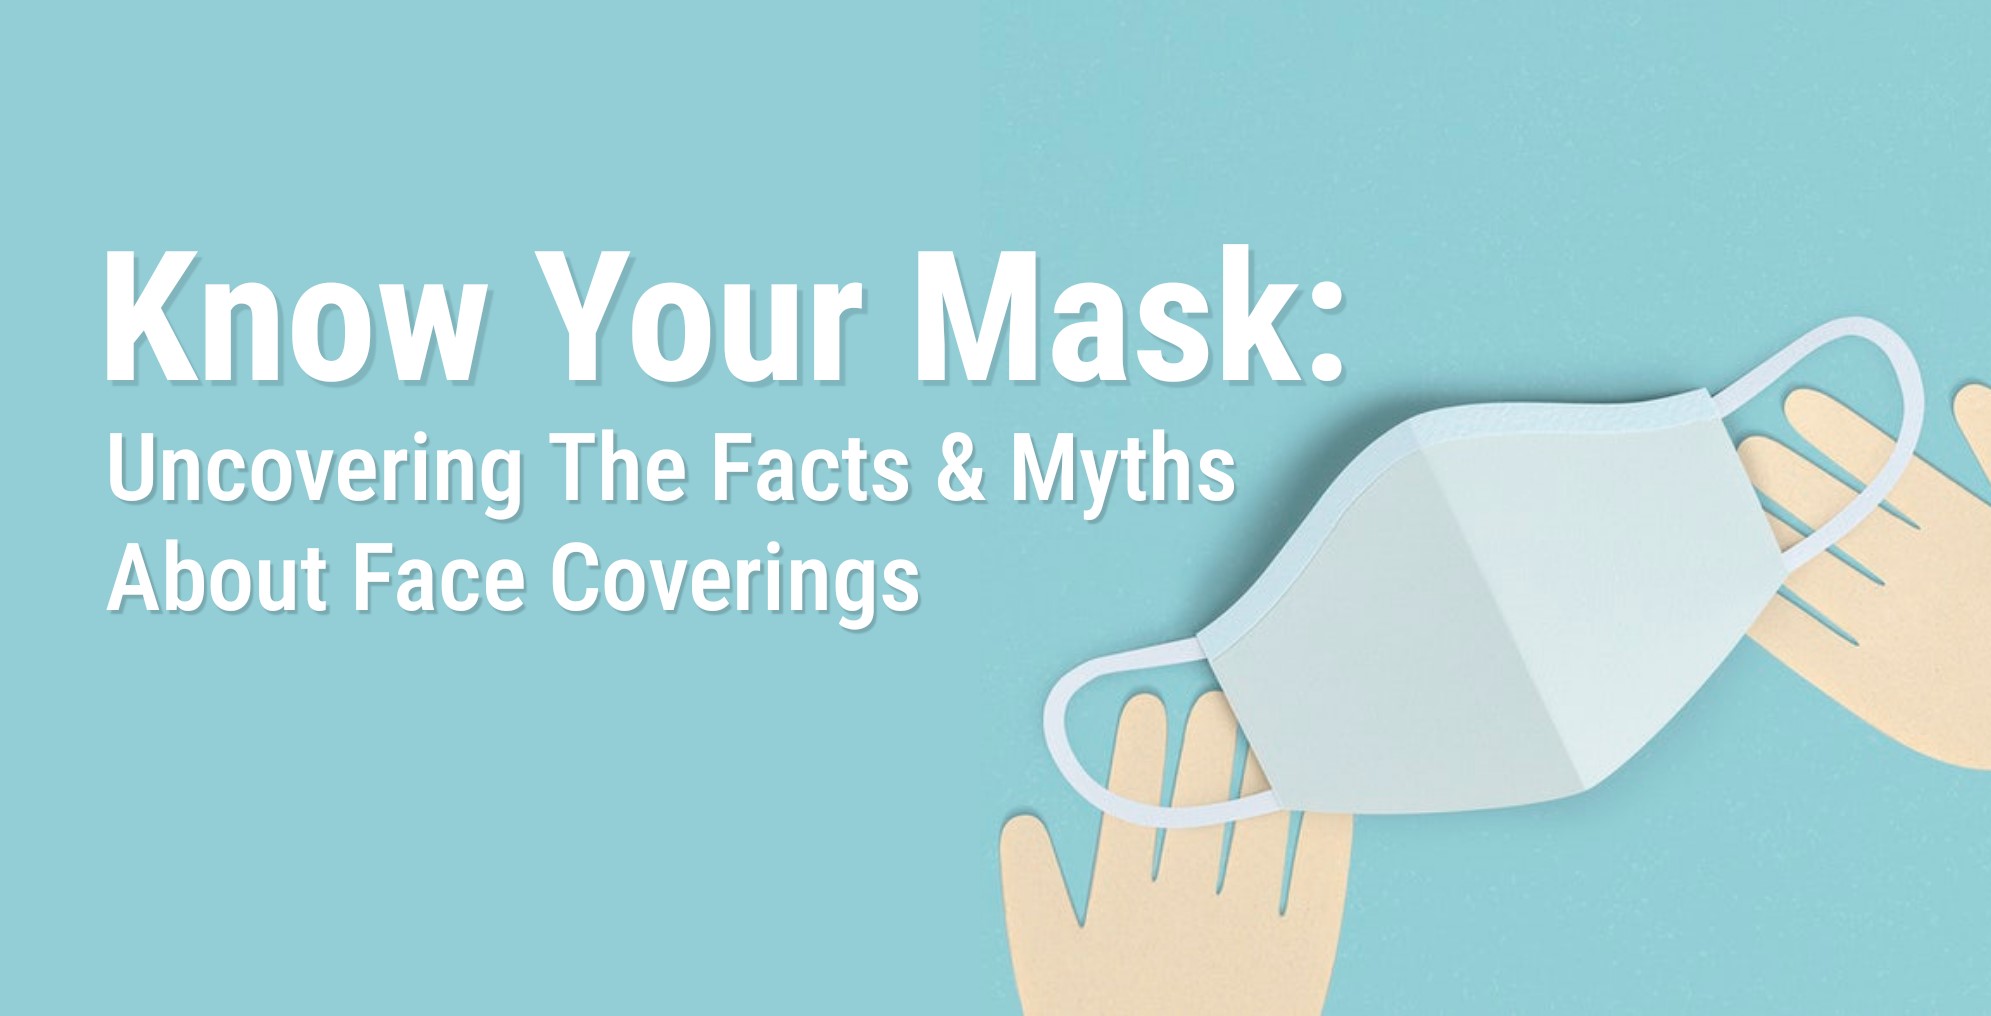 Myth-buster Alert!! True Facts to Know About Face Masks - Co-Defend